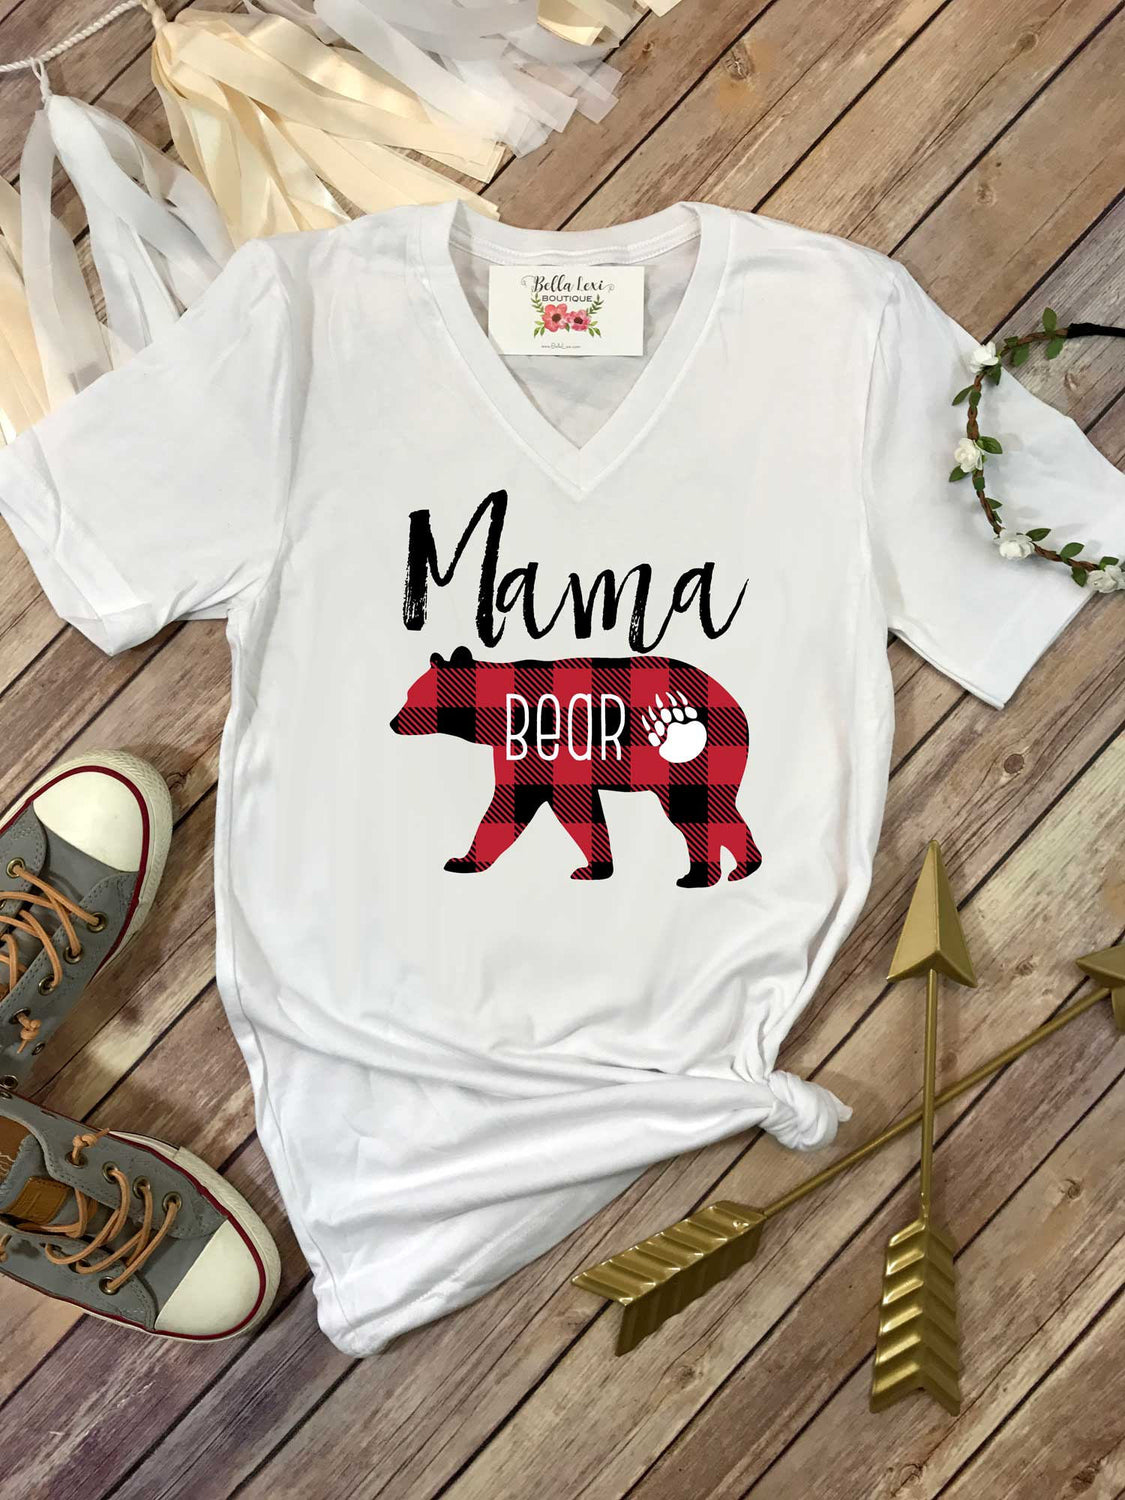 Mama Bear Shirt, Mommy and Me shirts, Mommy and Me Outfits, Buffalo Plaid Shirt, Mom Shirts, Family Outfits, Baby Shower Gift for Mom, RED